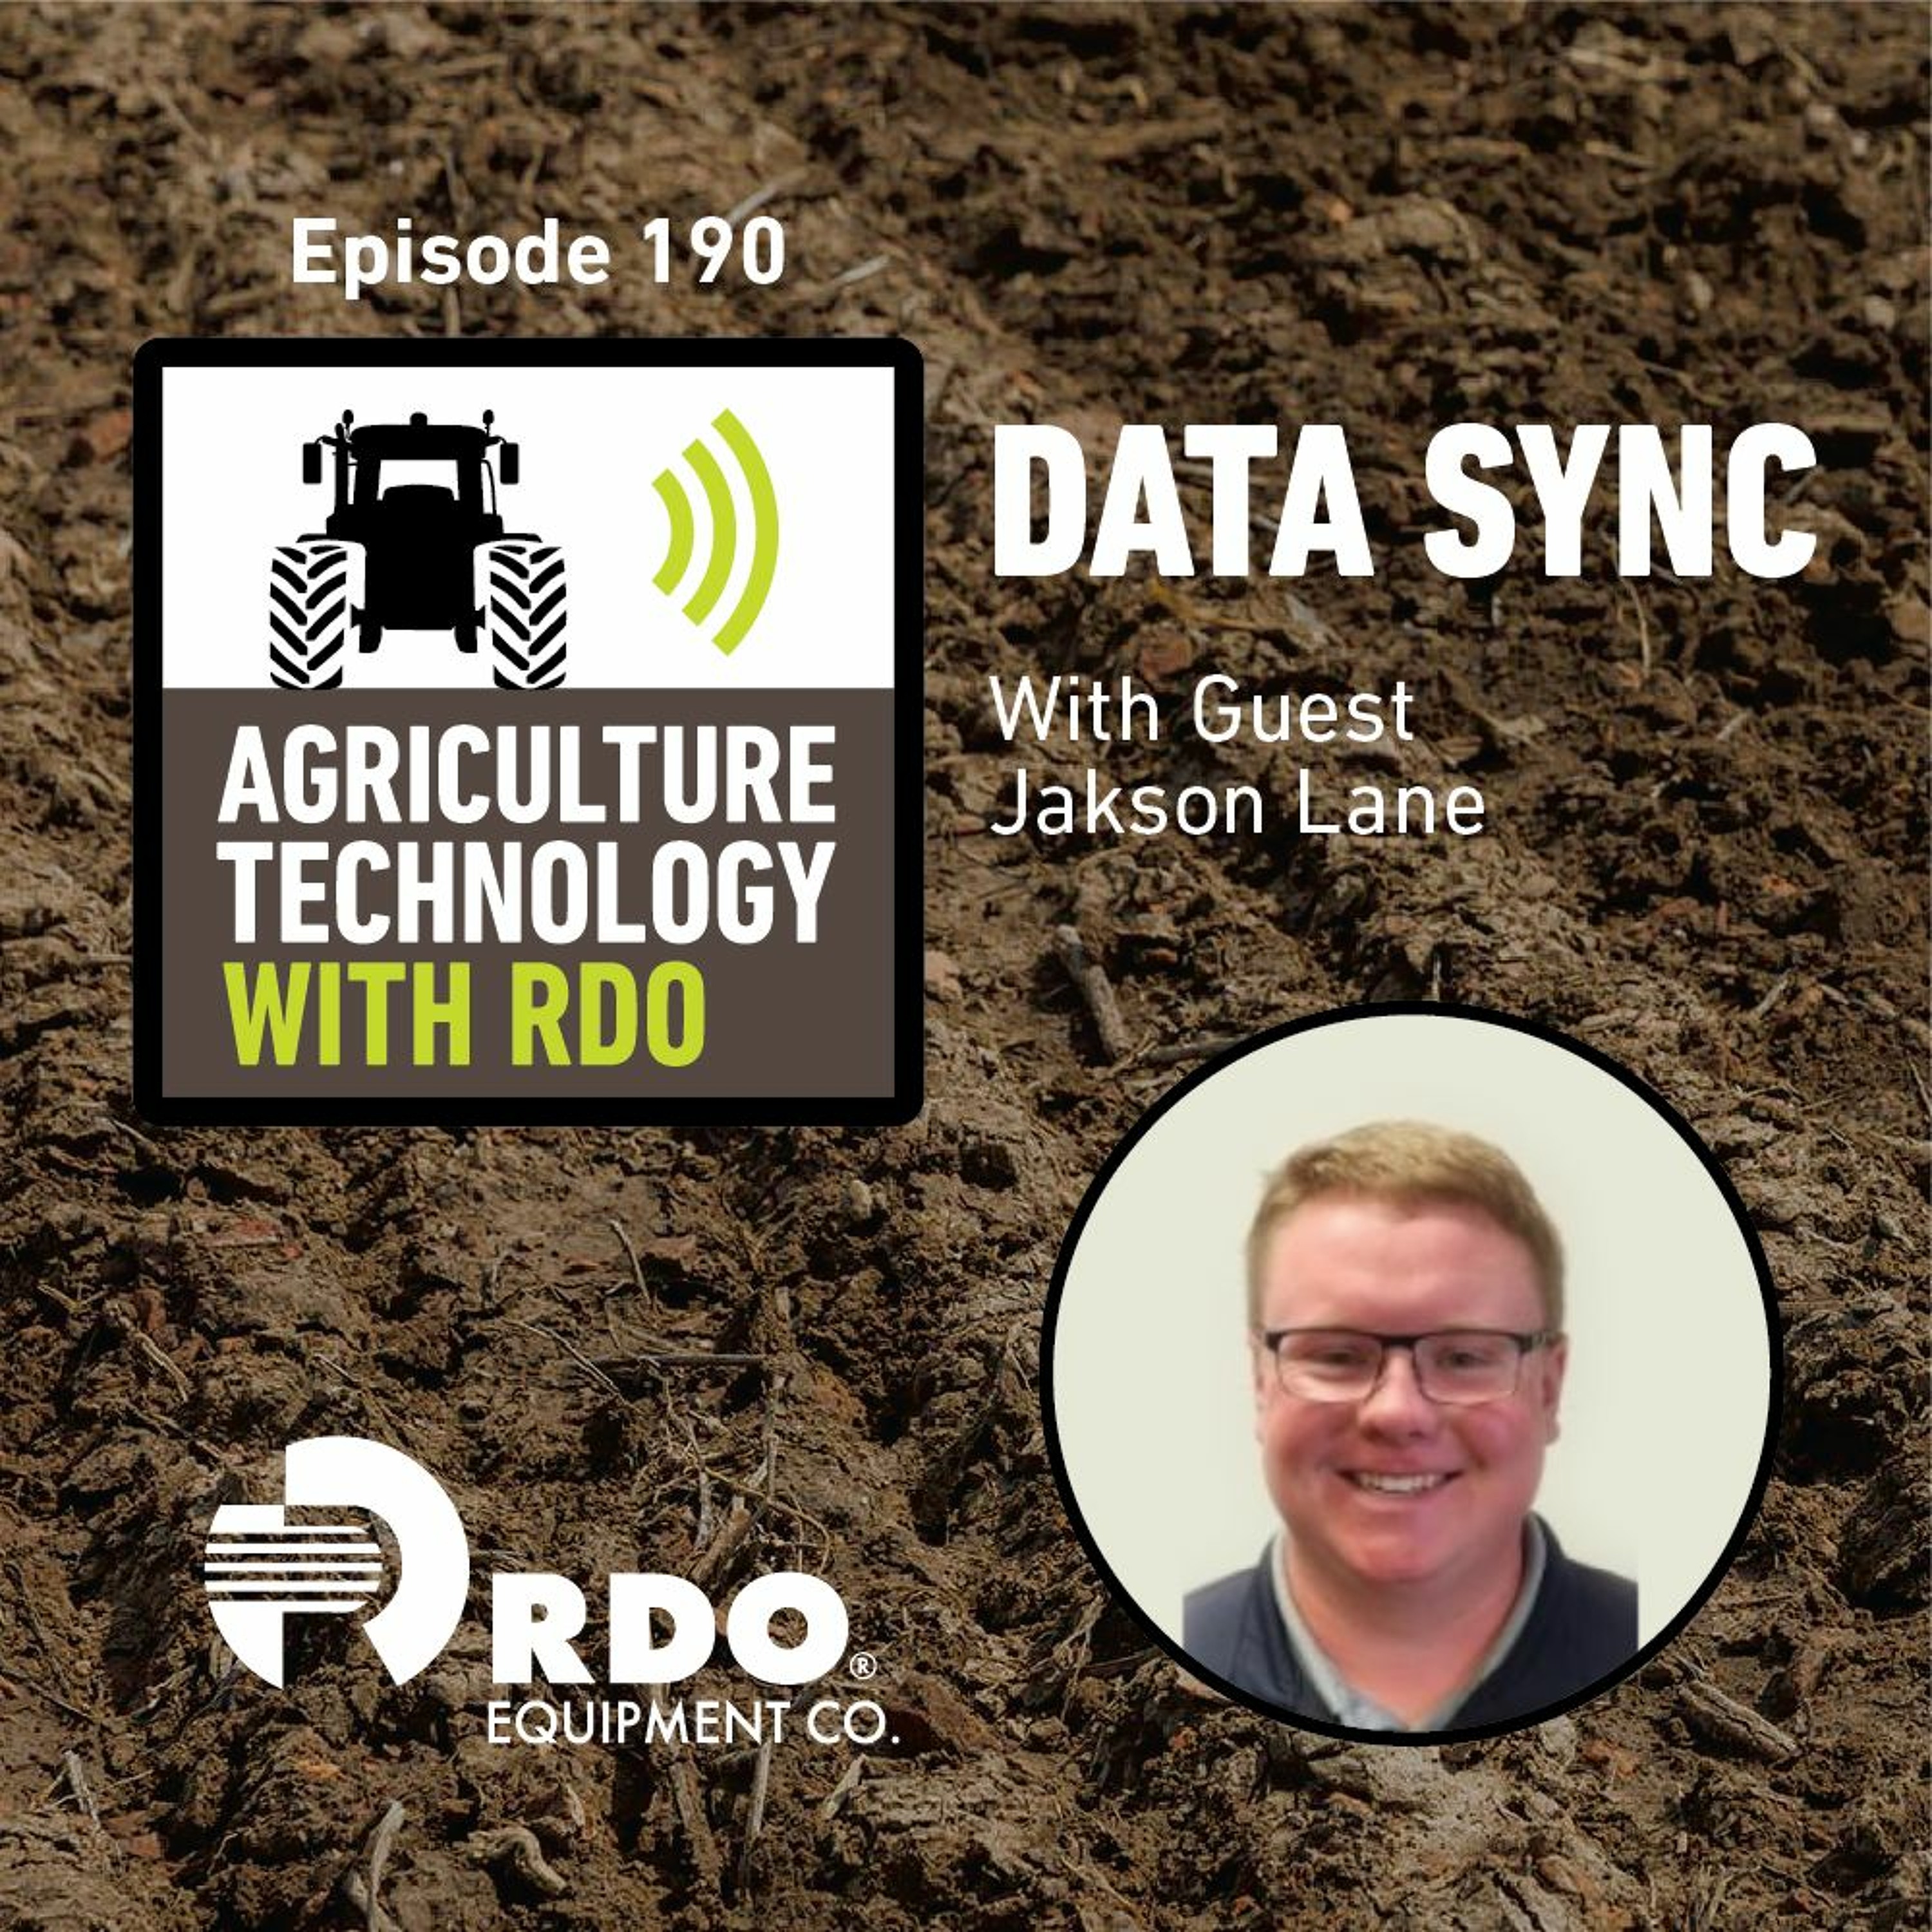 Ep. 190 - Data Sync with Guest Jakson Lane